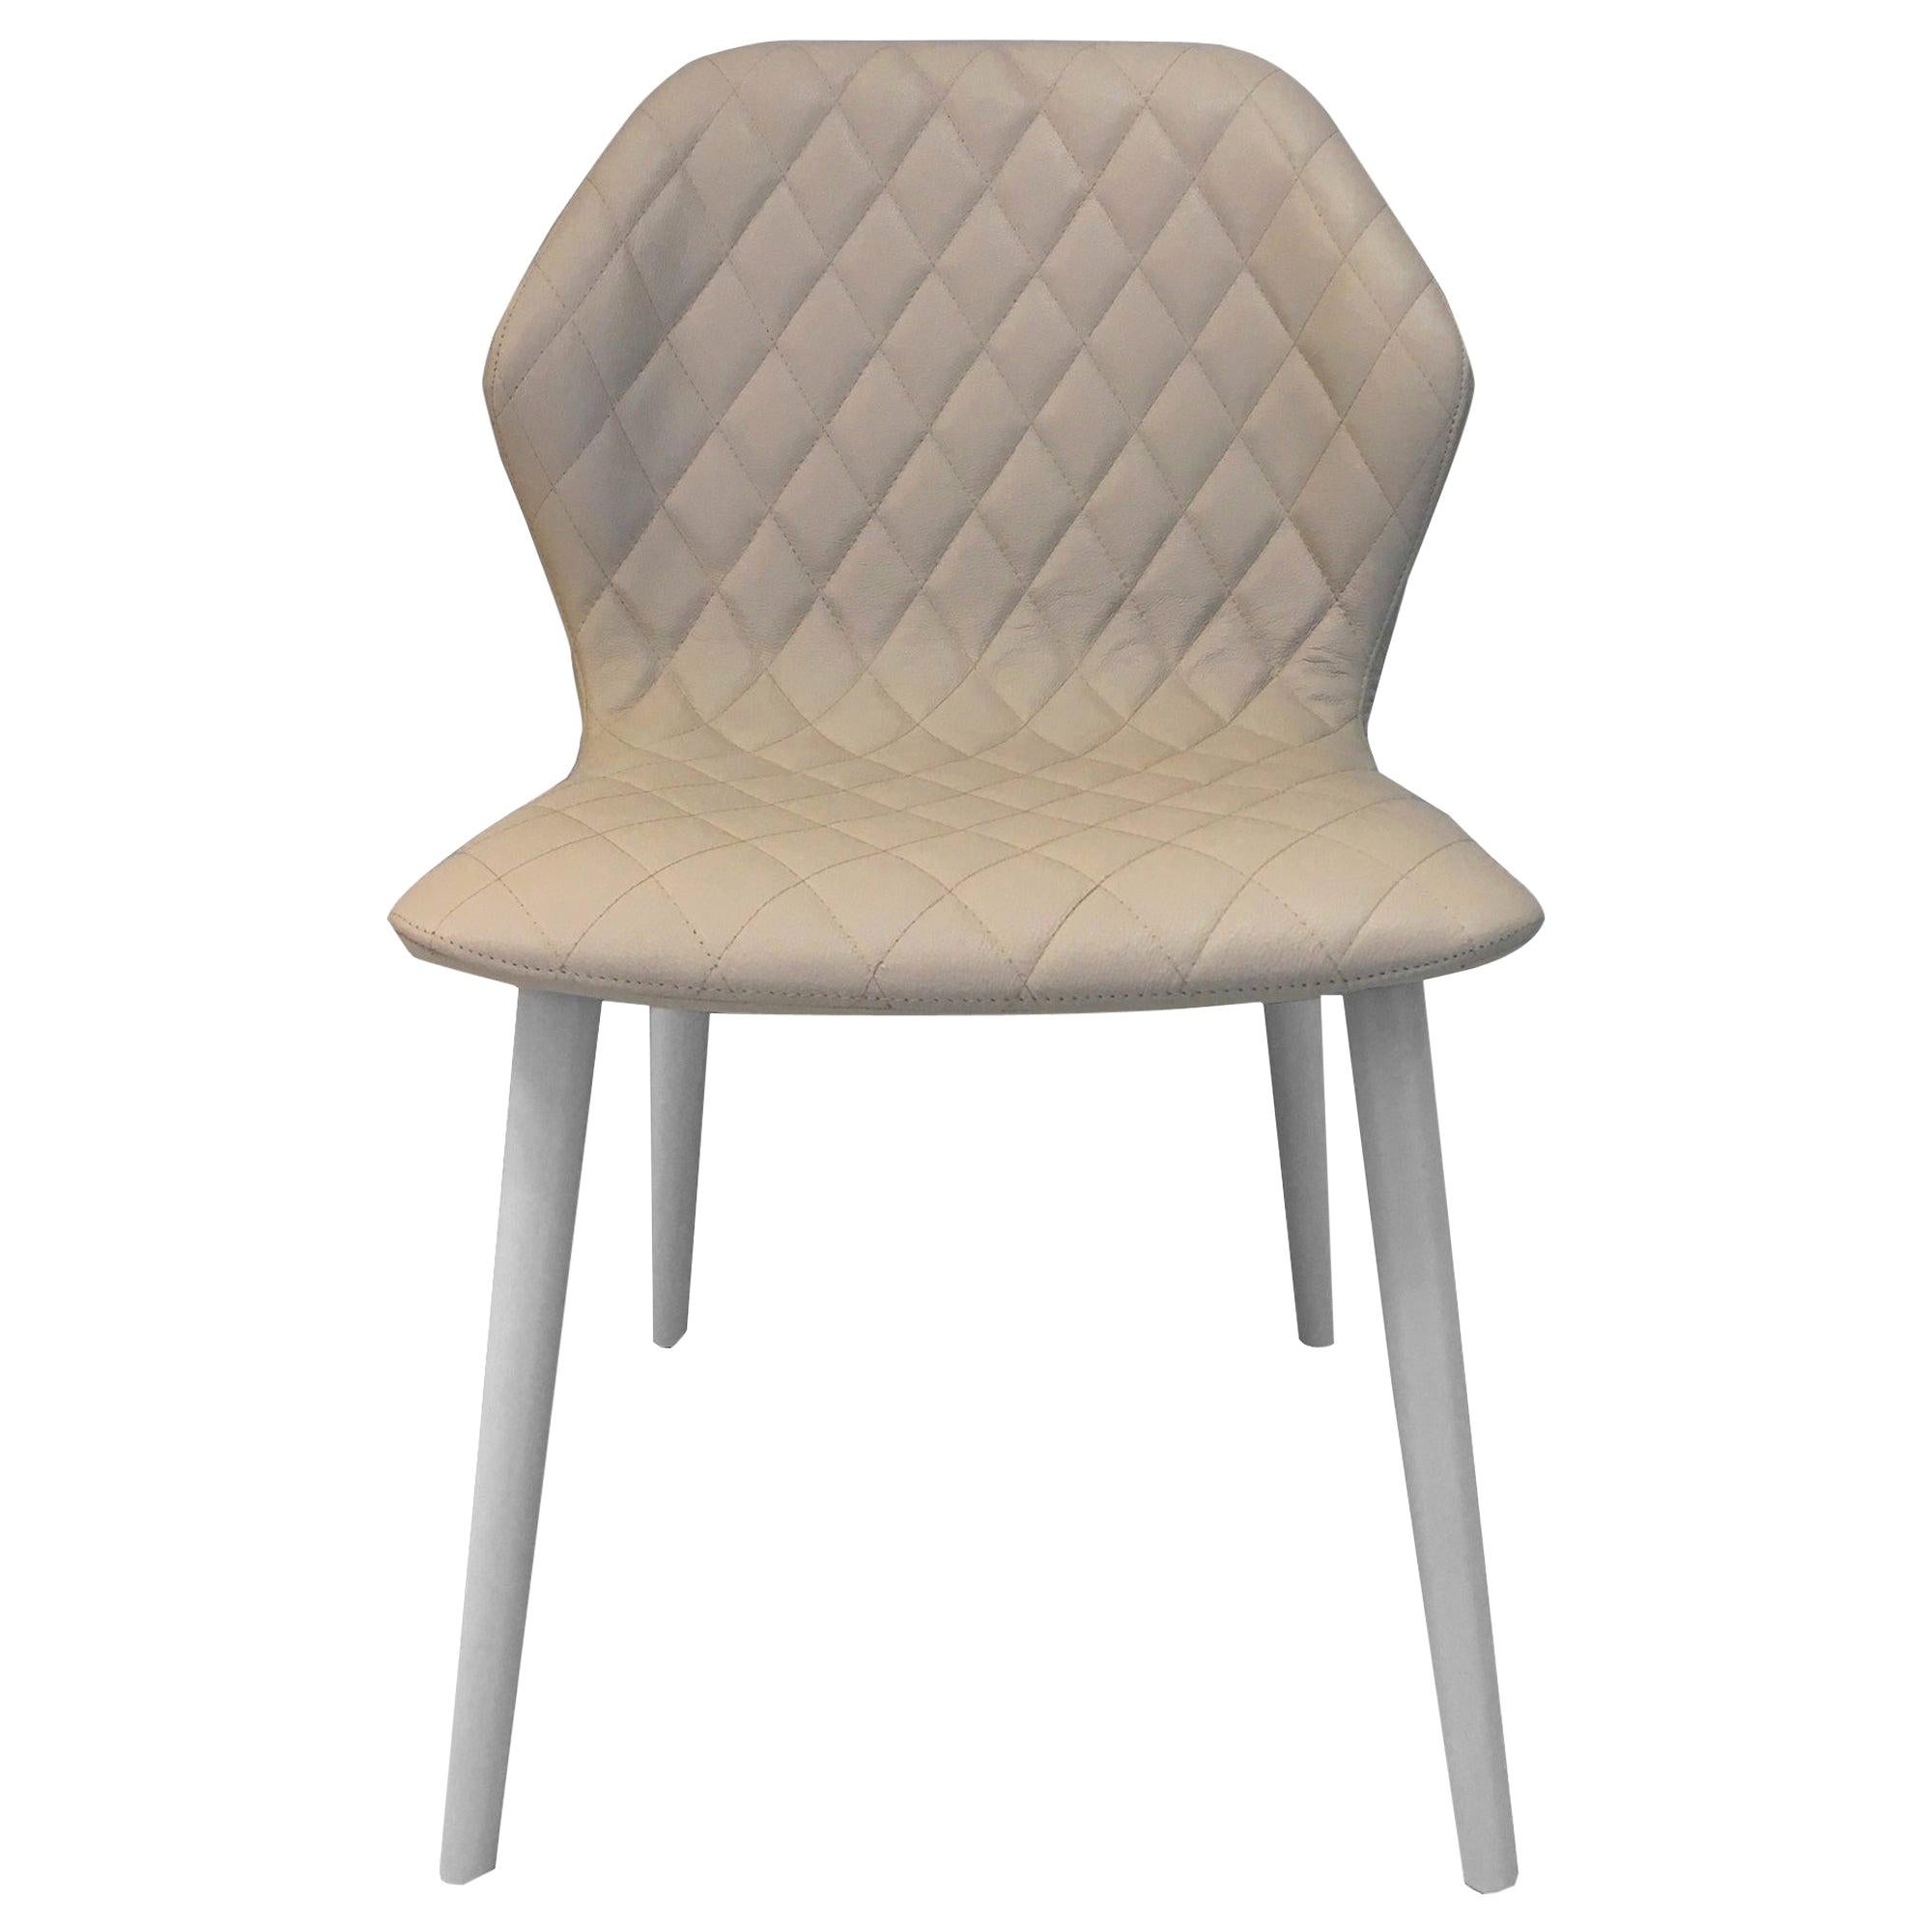 In Stock in Los Angeles, Ava Beige Leather Quilted Chair by Michael Schmidt